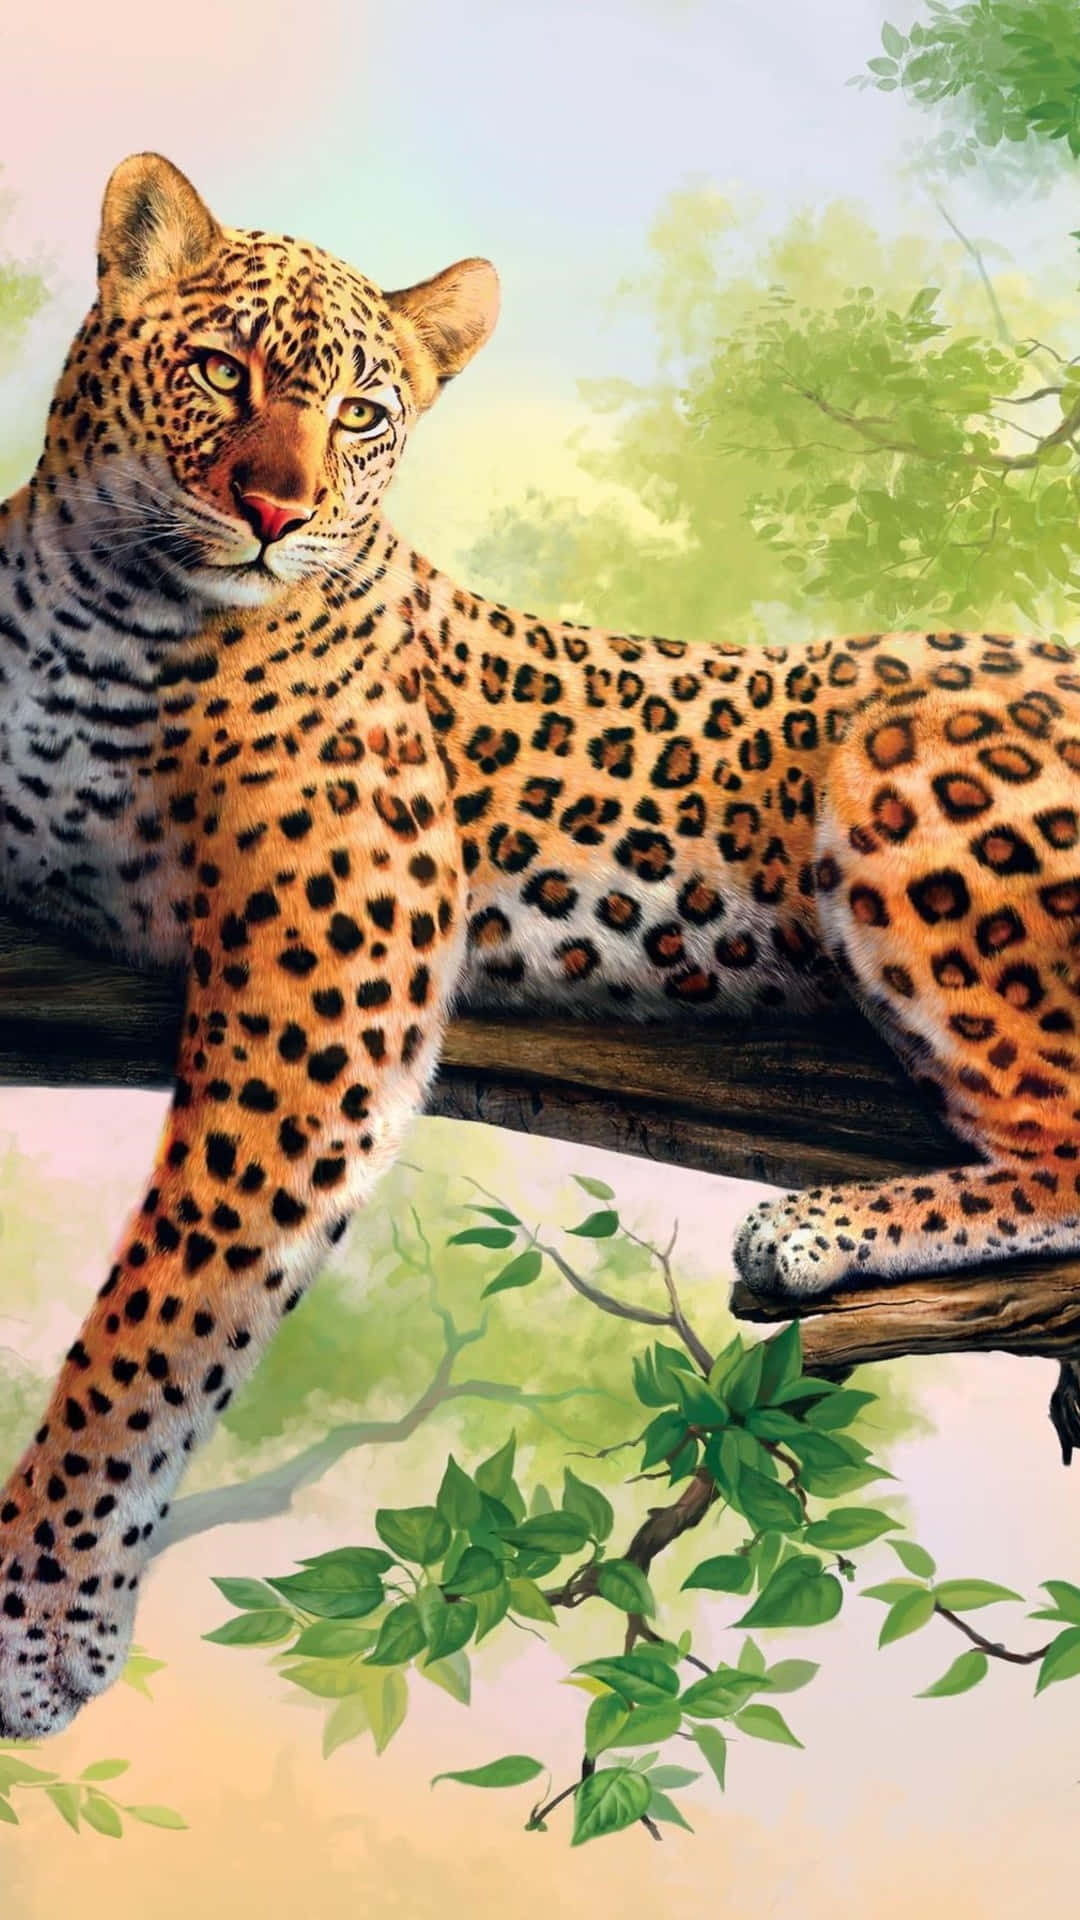 Get wild and unleash your creativity with our incredible Animals Iphone wallpaper! Wallpaper